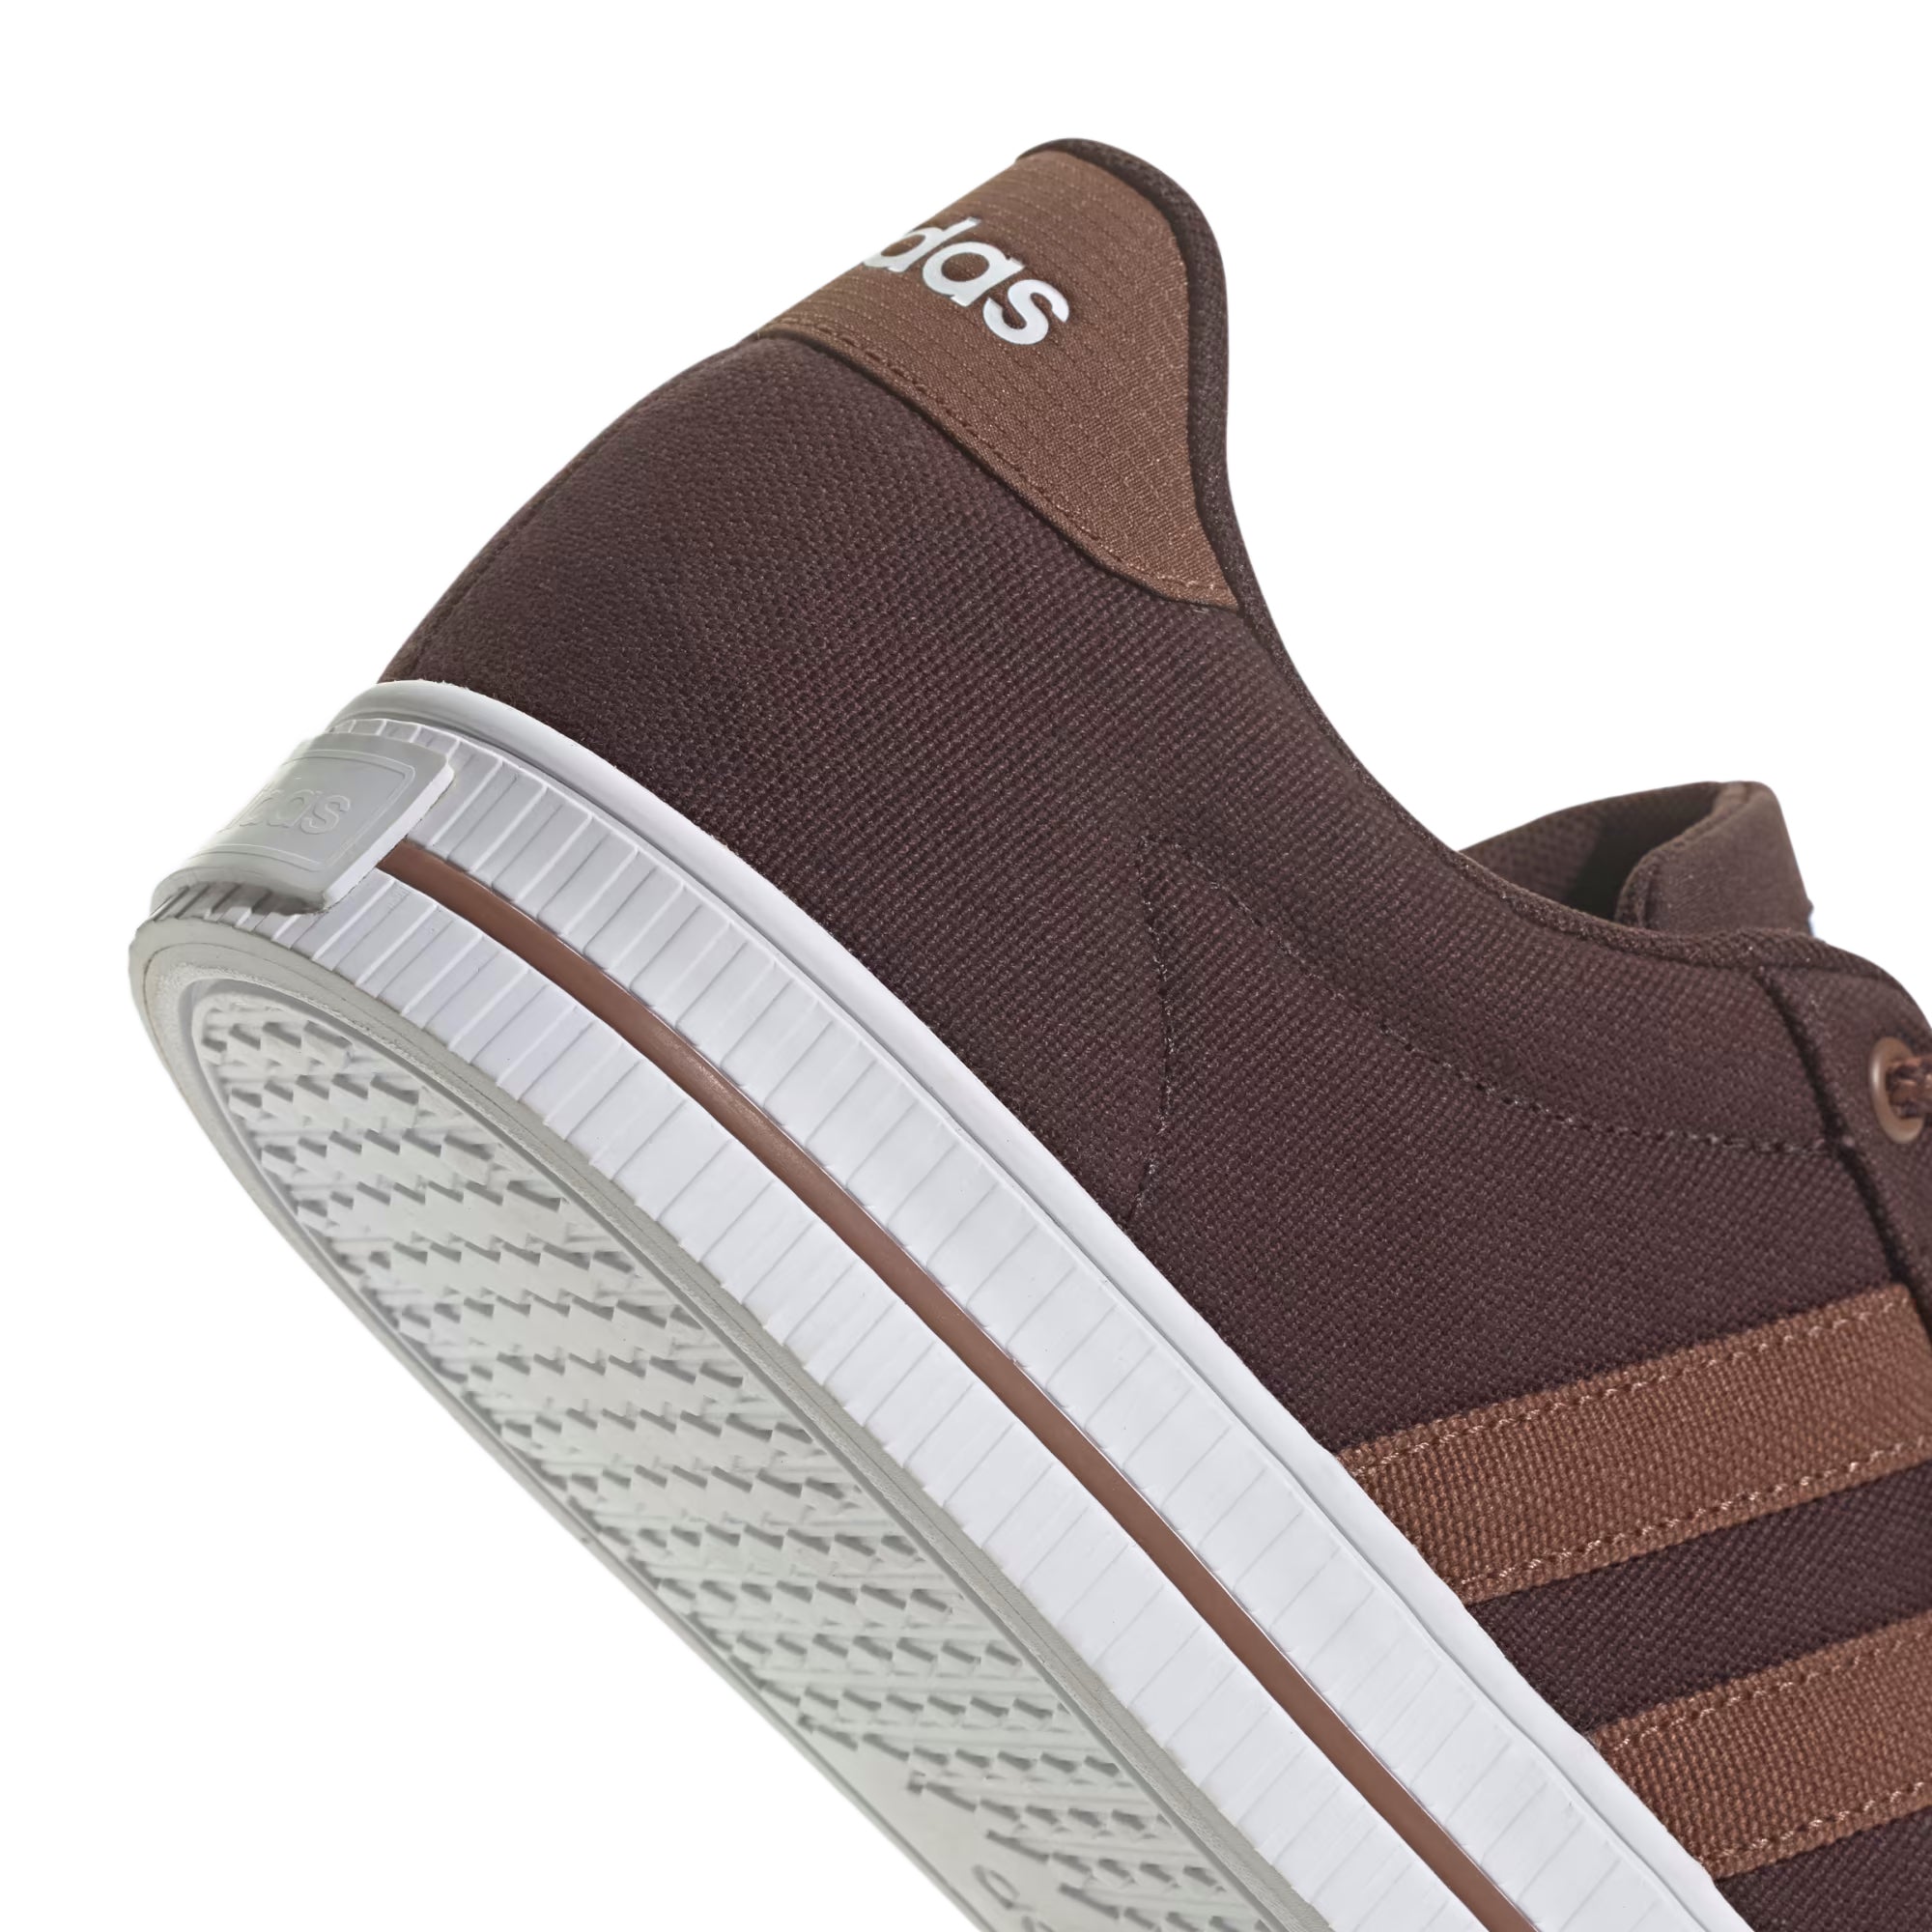 Brown canvas Adidas sneaker with lighter brown stripes and a white sole.